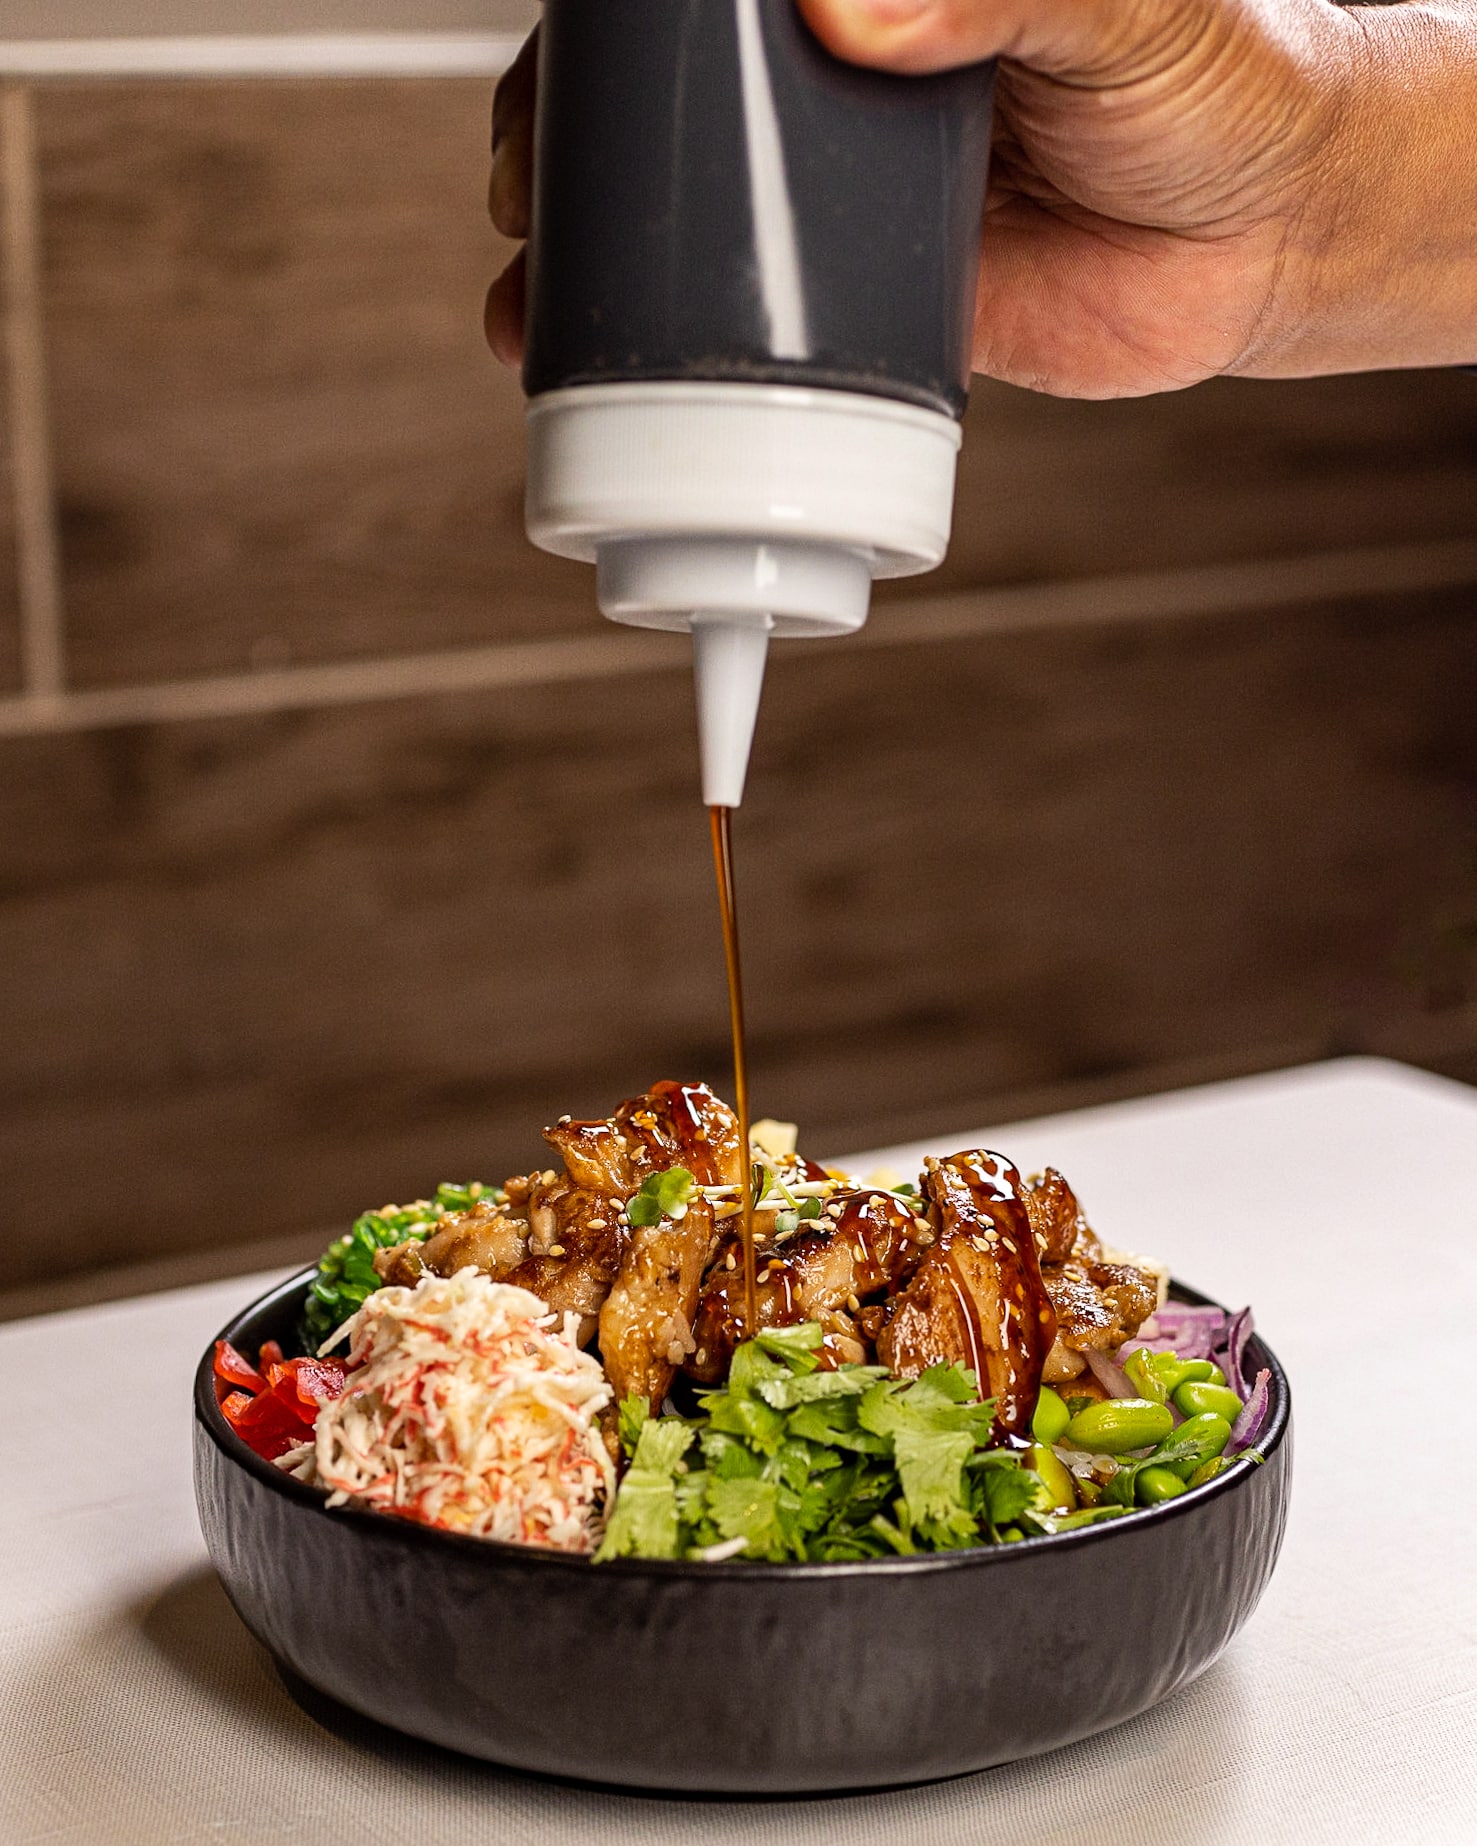 A person pouring sauce on a bowl of salad.